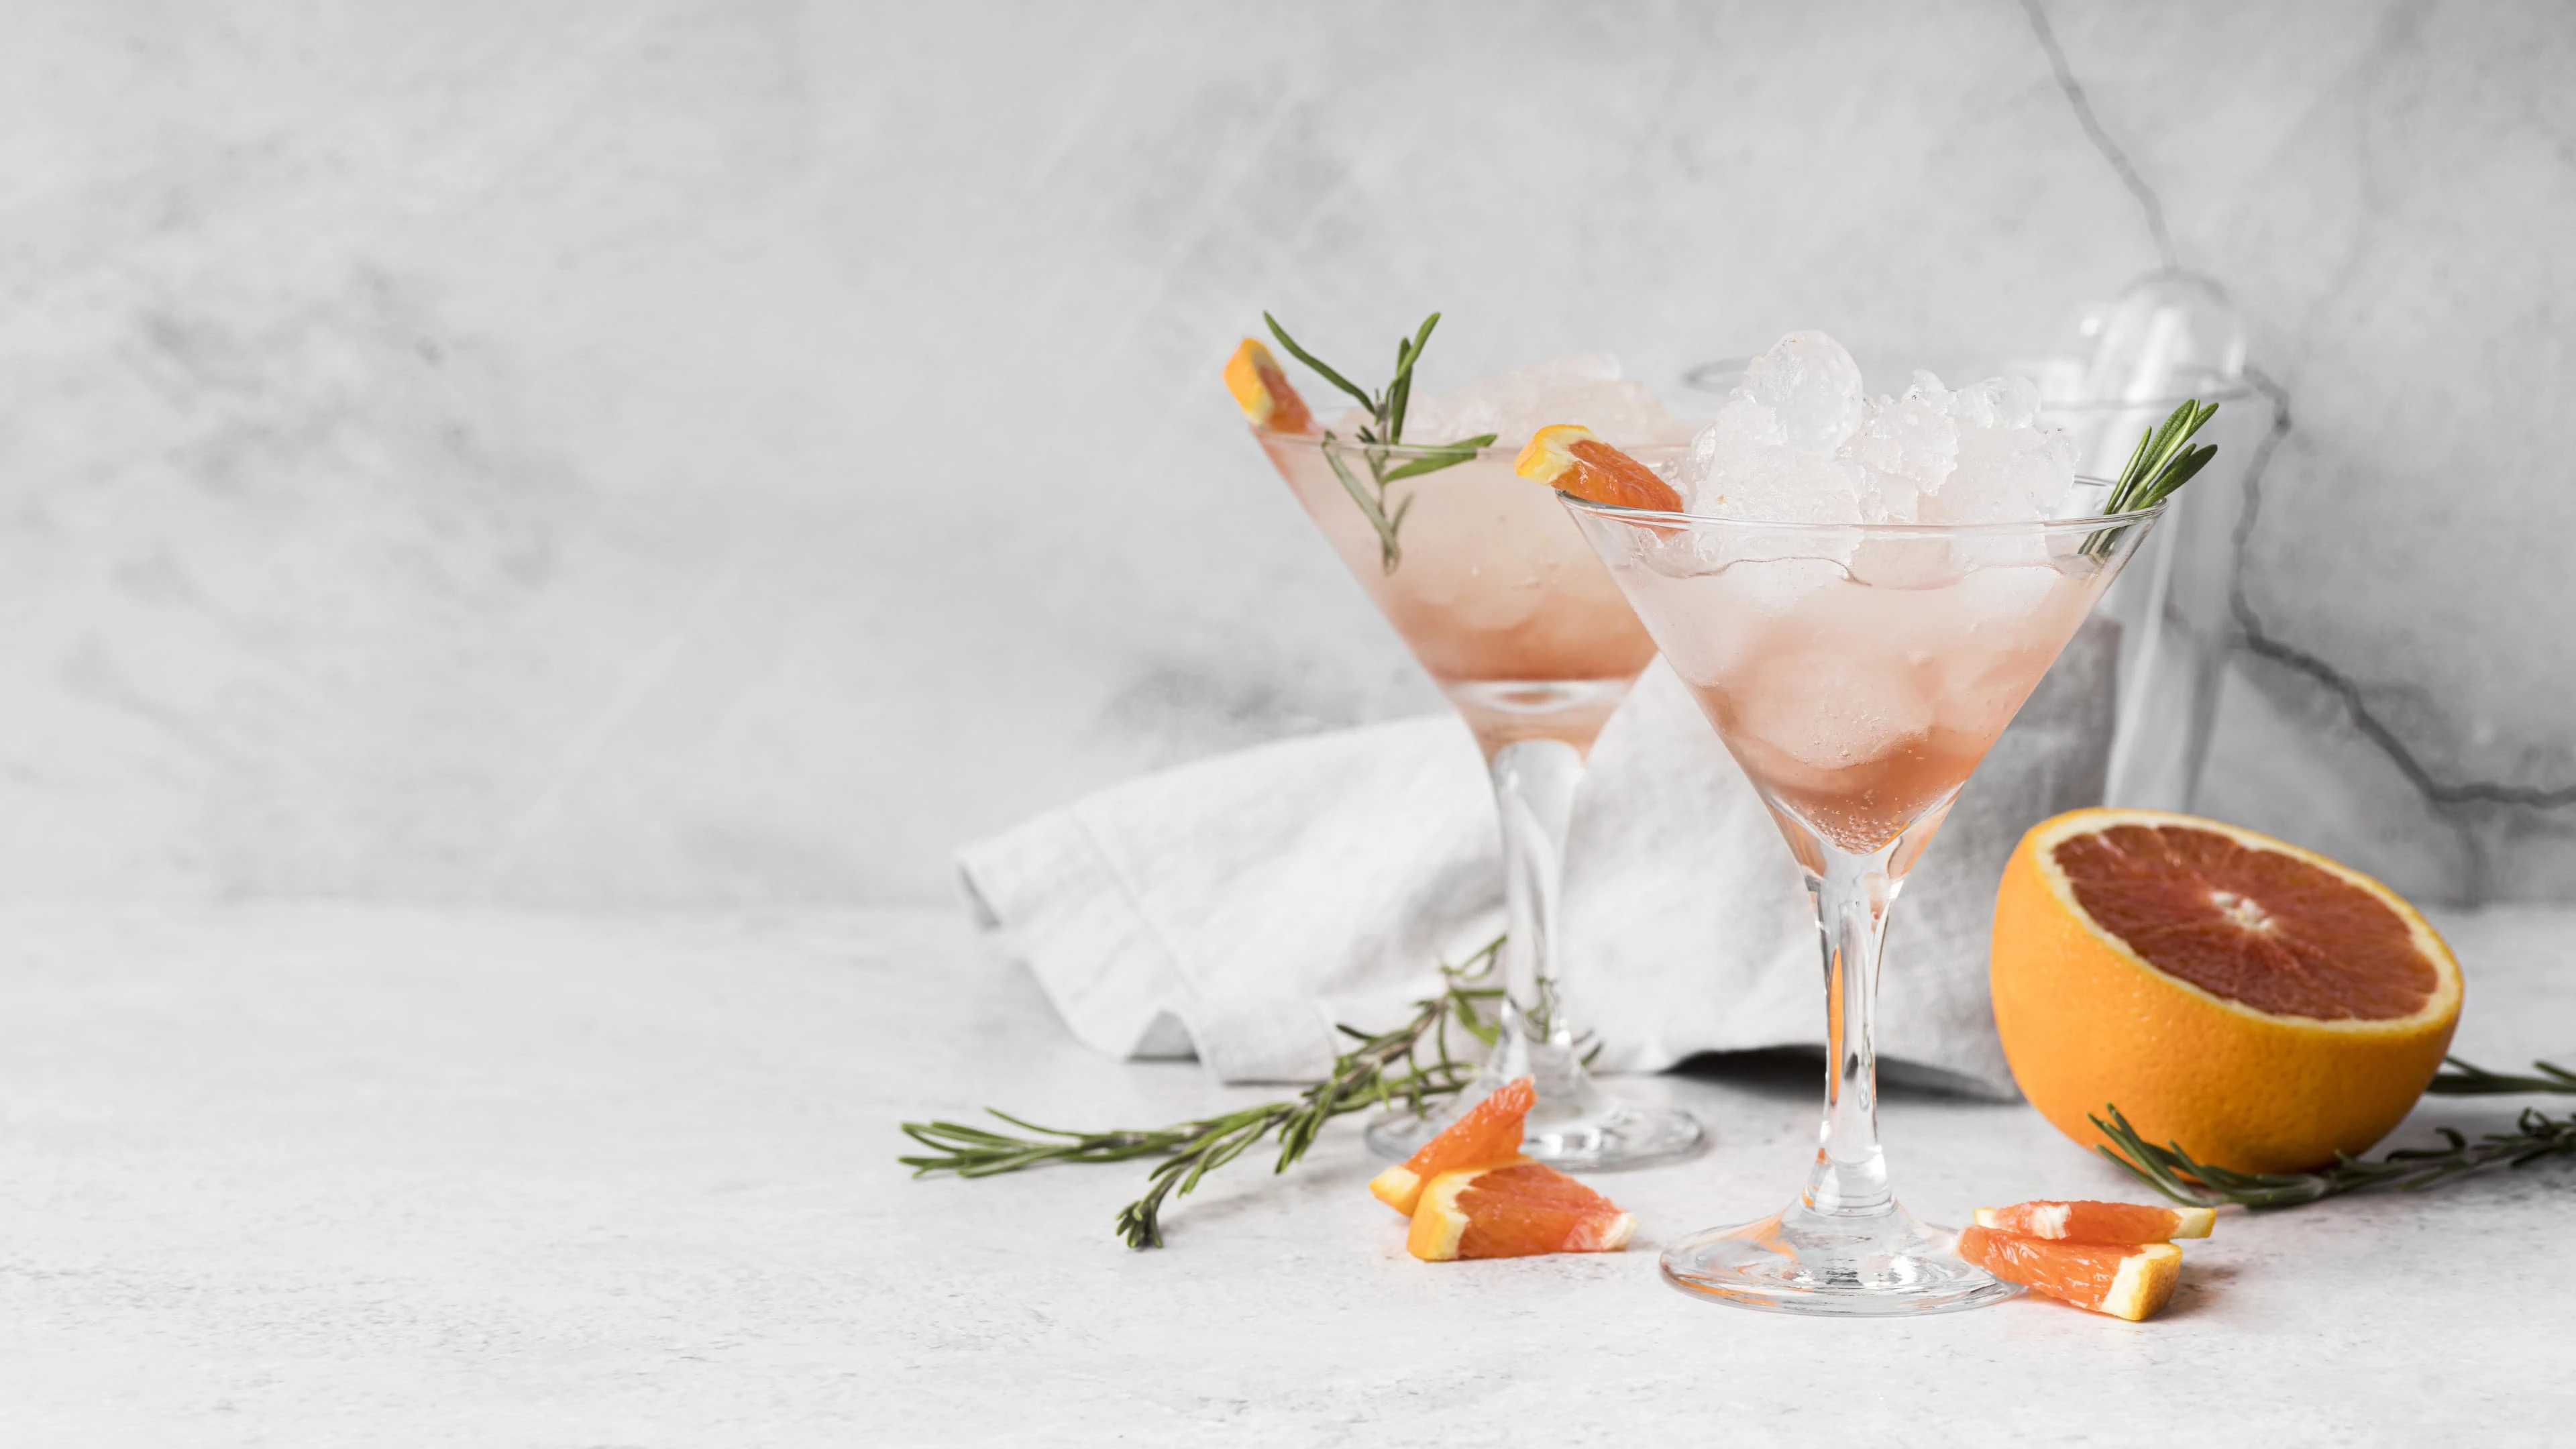 Alcoholic beverage cocktail with fresh grapefruit